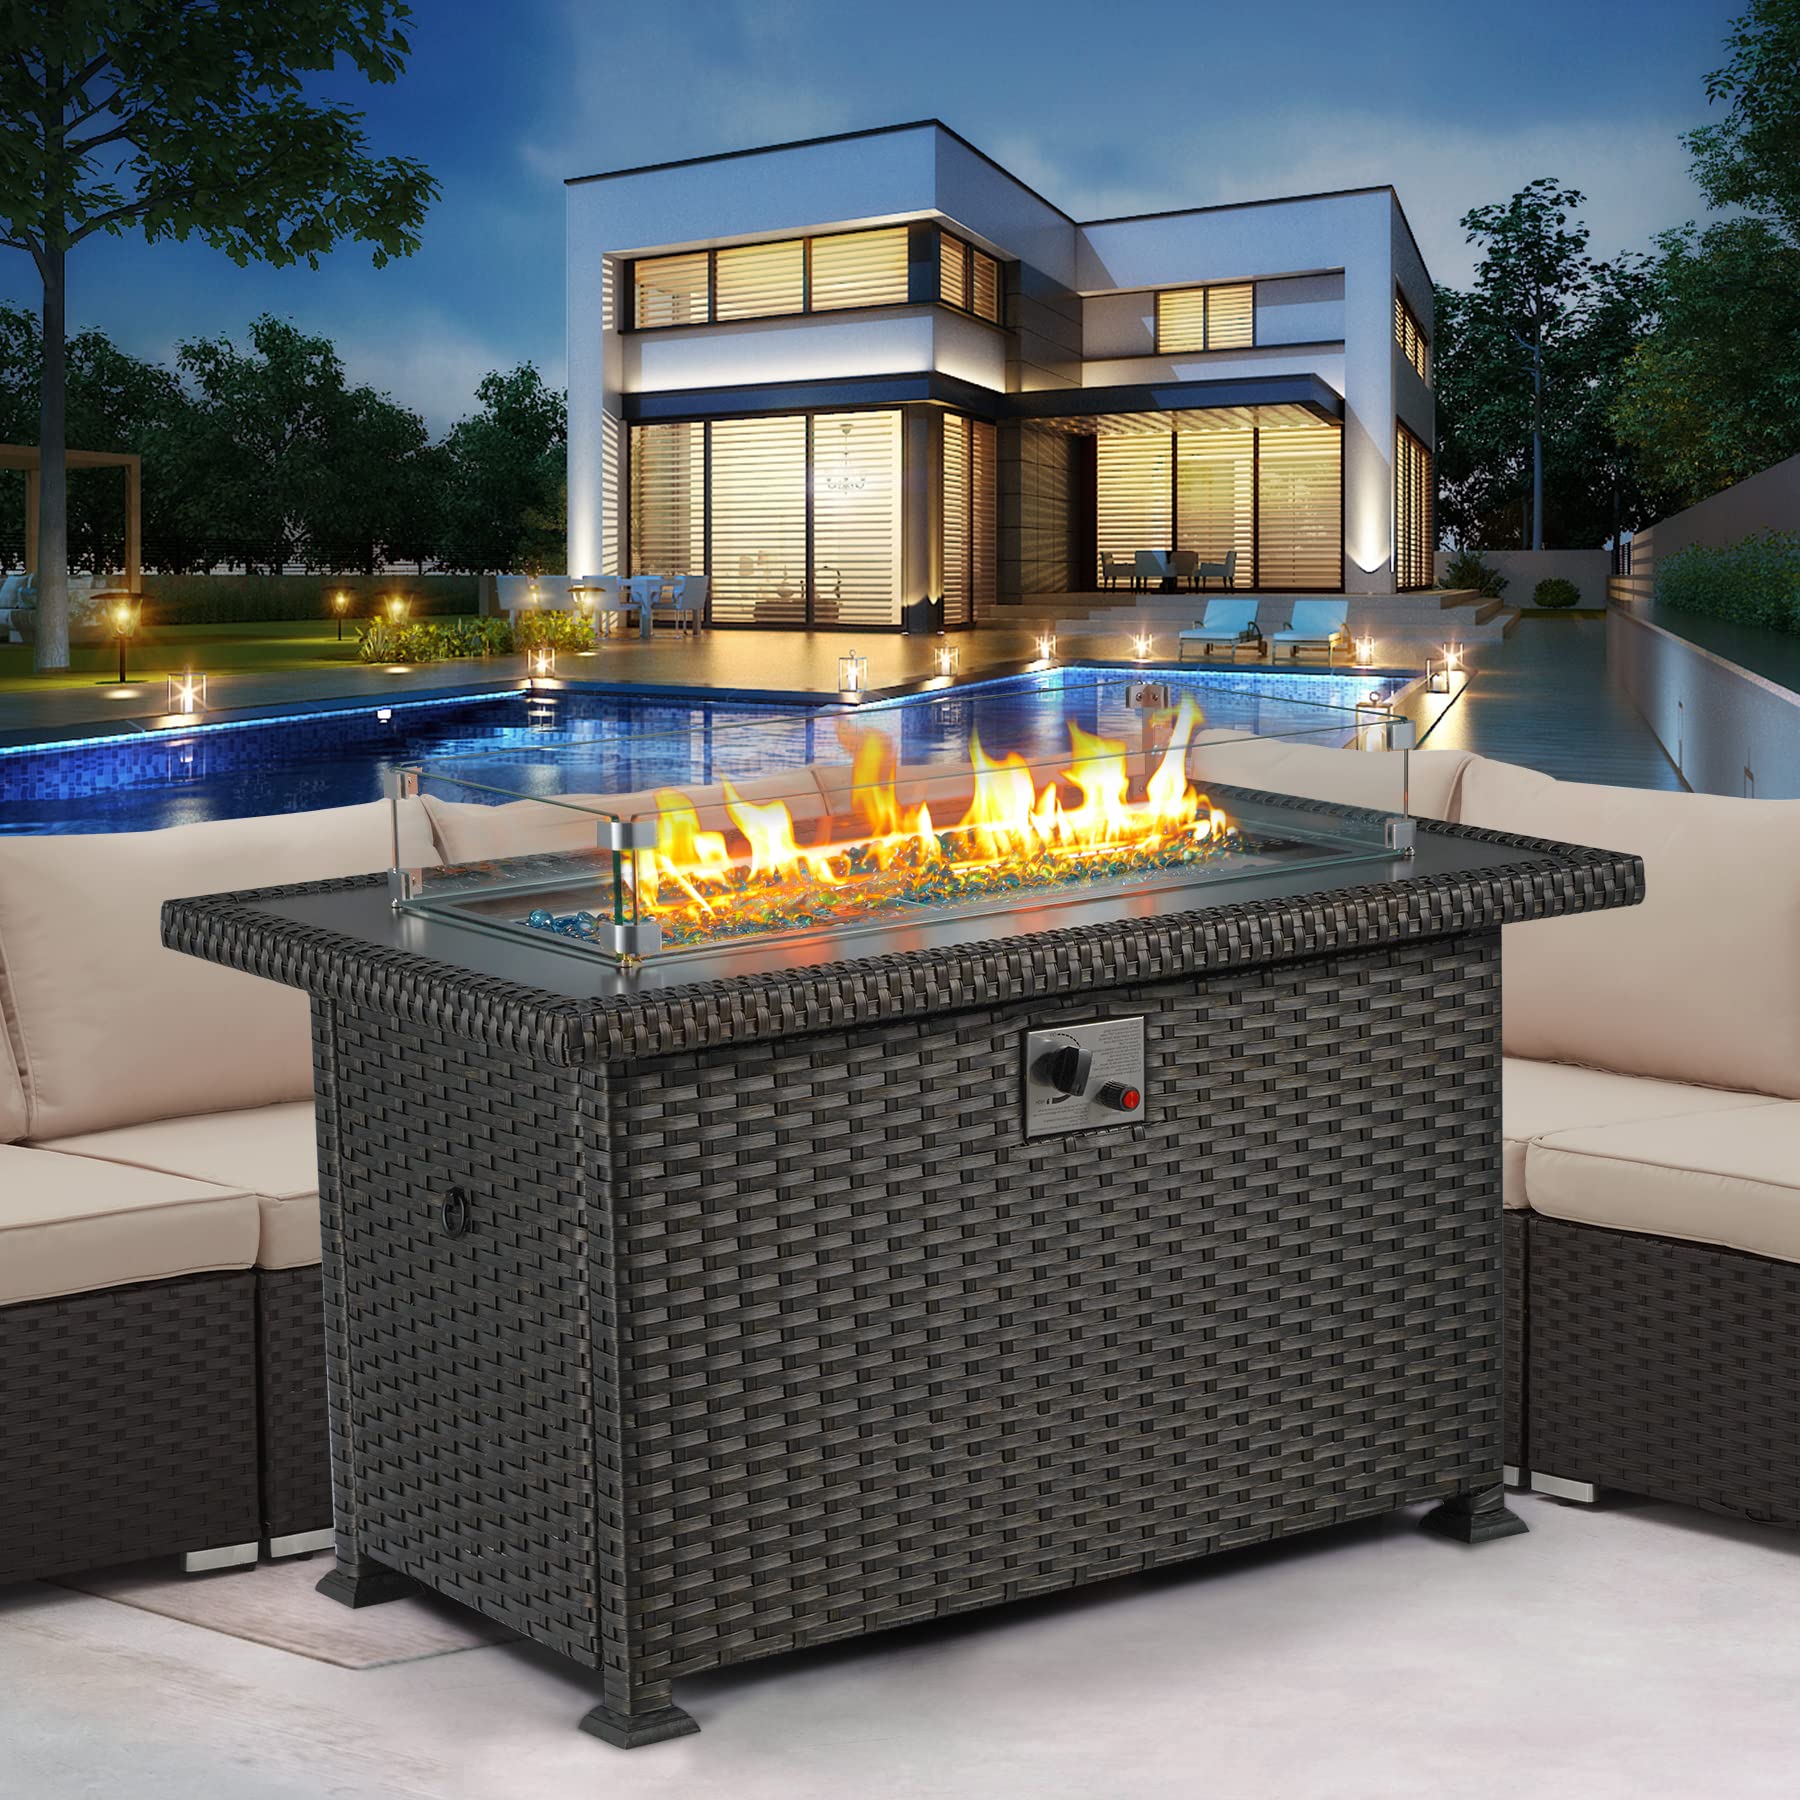 GYUTEI Fire Pit Table,Propane Fire Pits for Outside,44in 50,000 BTU Auto-Ignition Gas Fire Table w/CSA Certification,Outdoor Fire Pit for Garden Patio (Black)